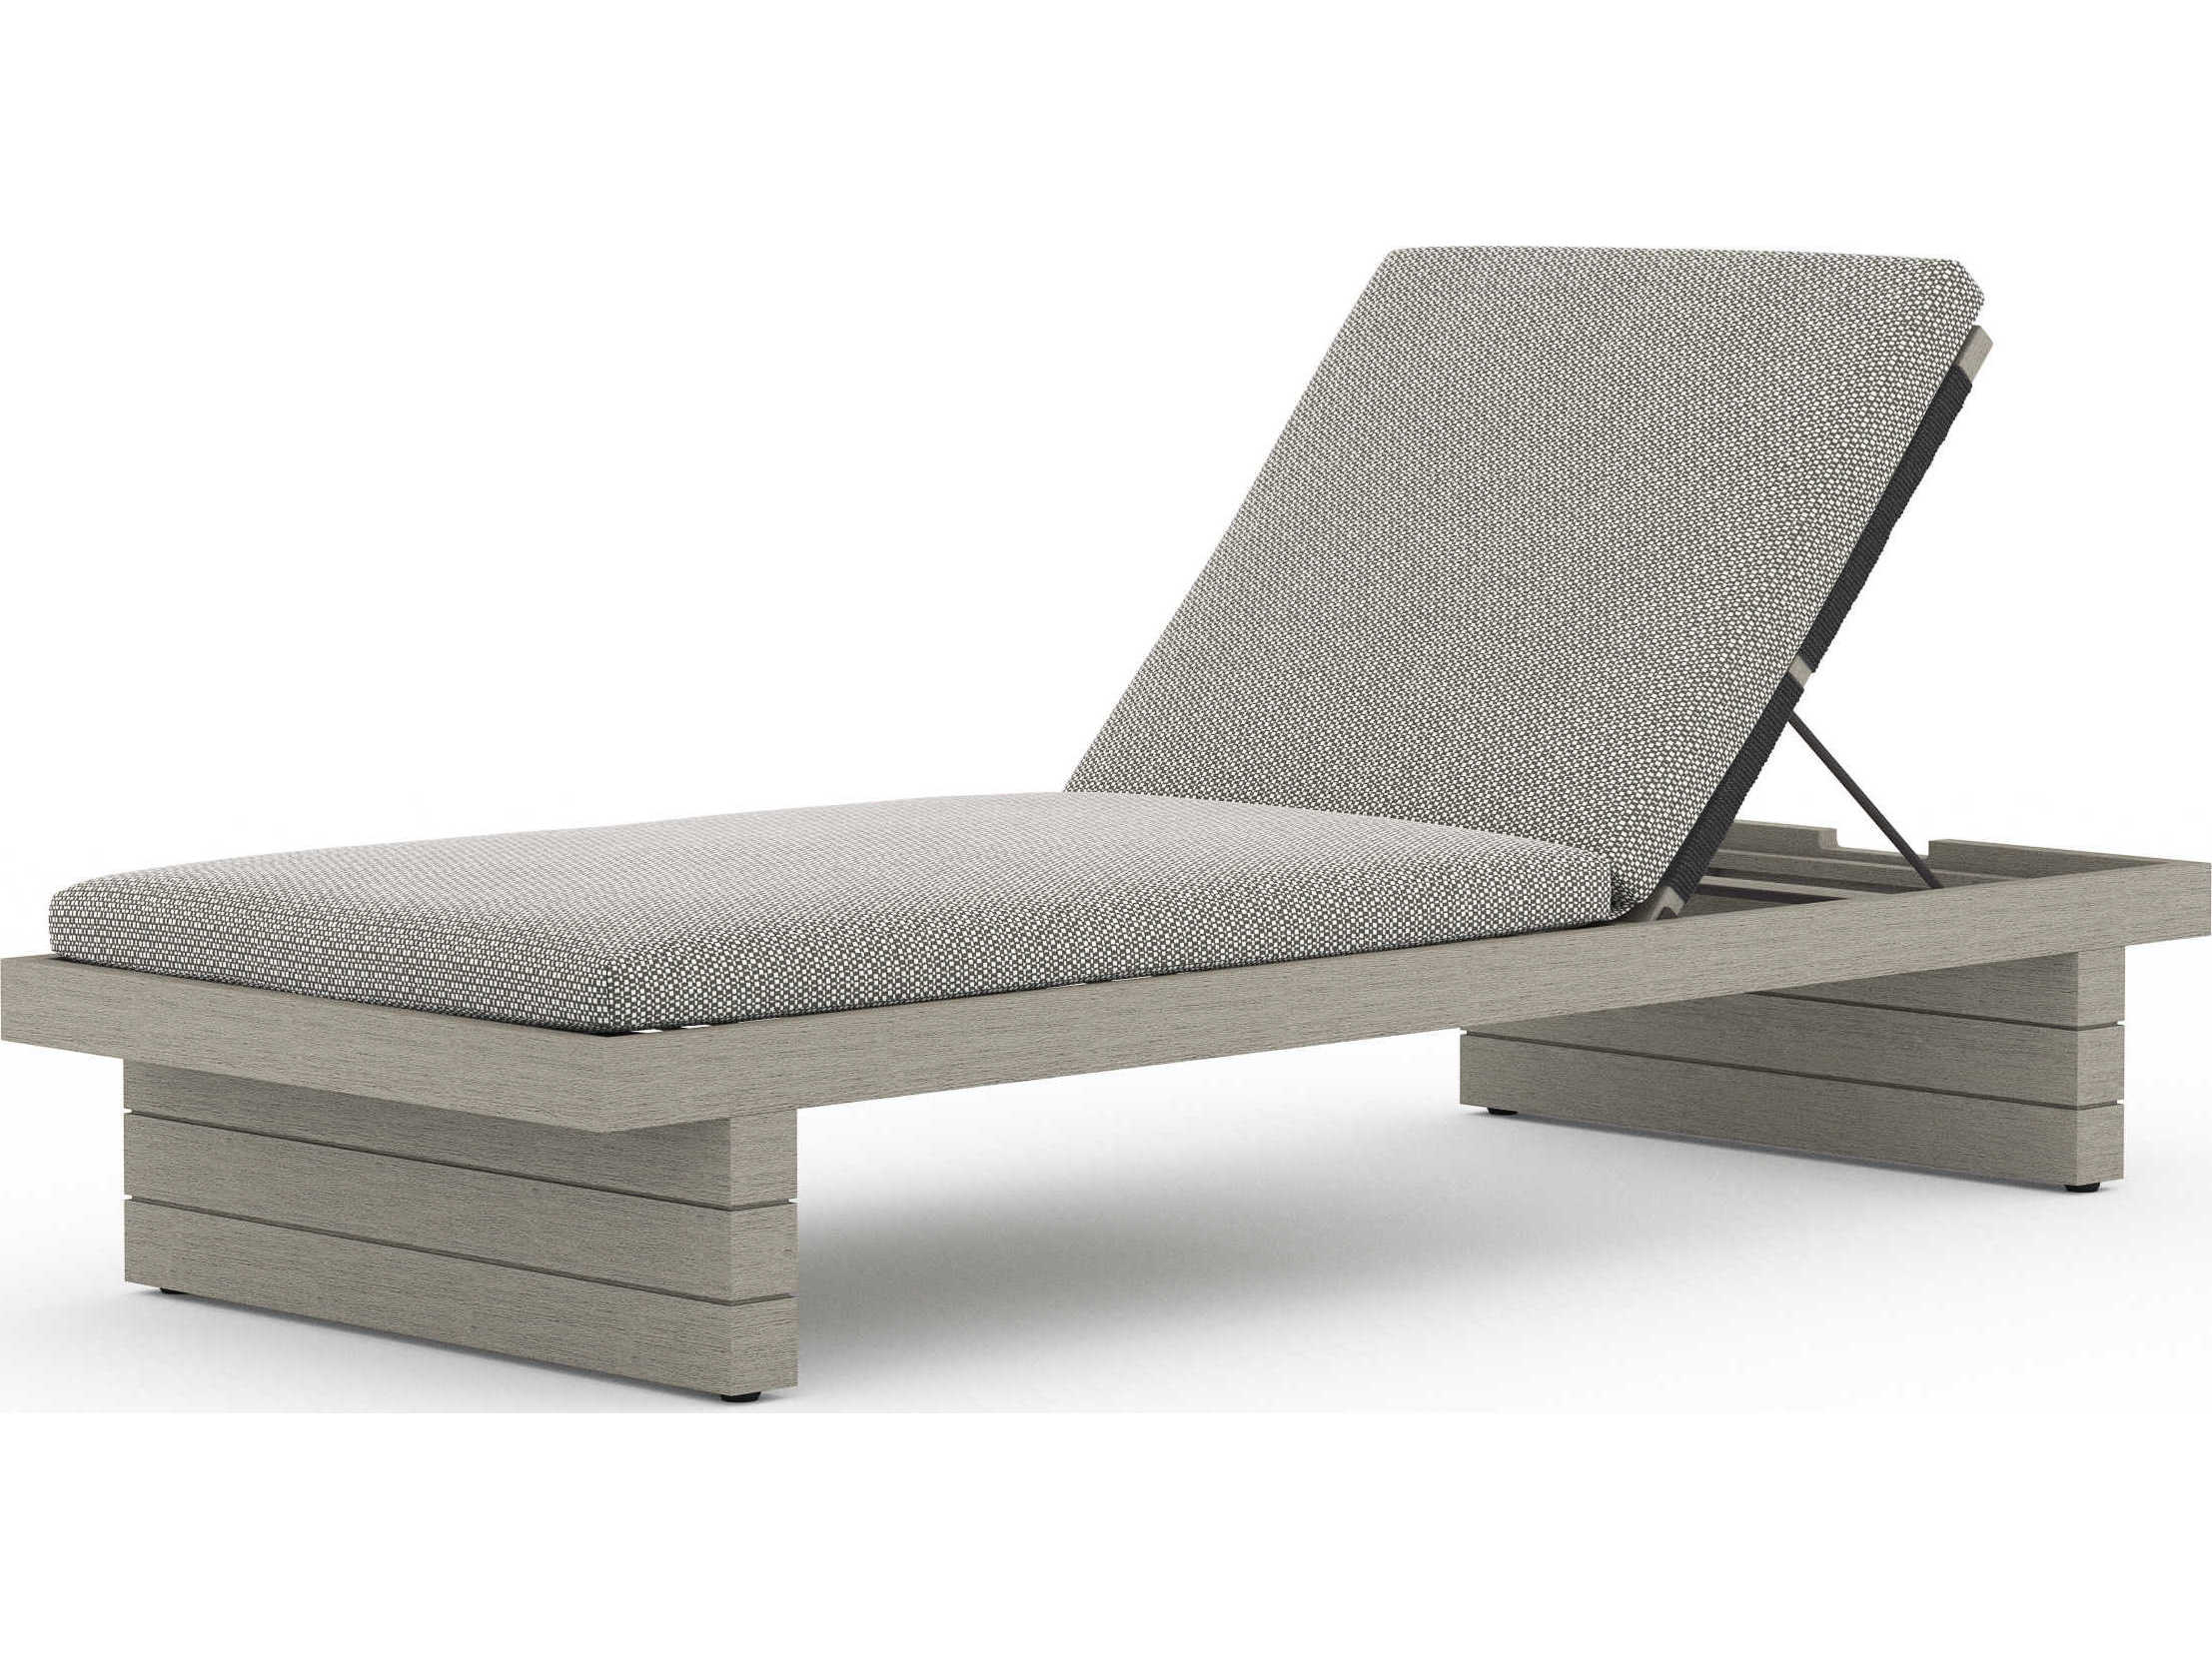 Kwelling sensatie hoop Four Hands Outdoor Solano Weathered Grey Teak Chaise Lounge with Faye Ash  Cushion | FHO223214008